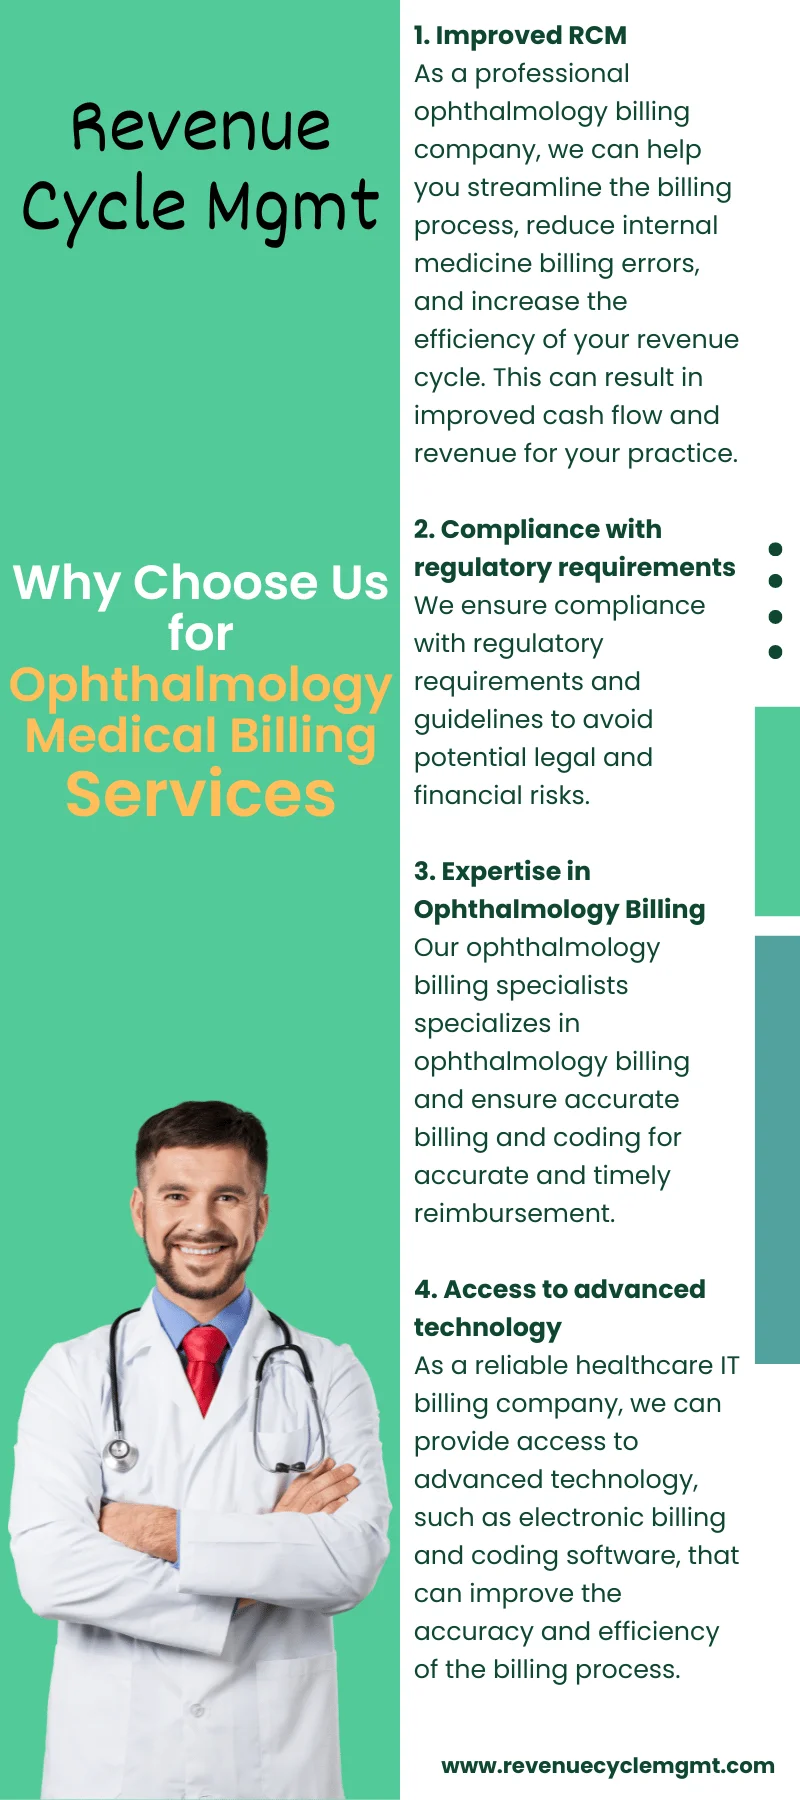 Why Choose Us for Ophthalmology Medical Billing Services